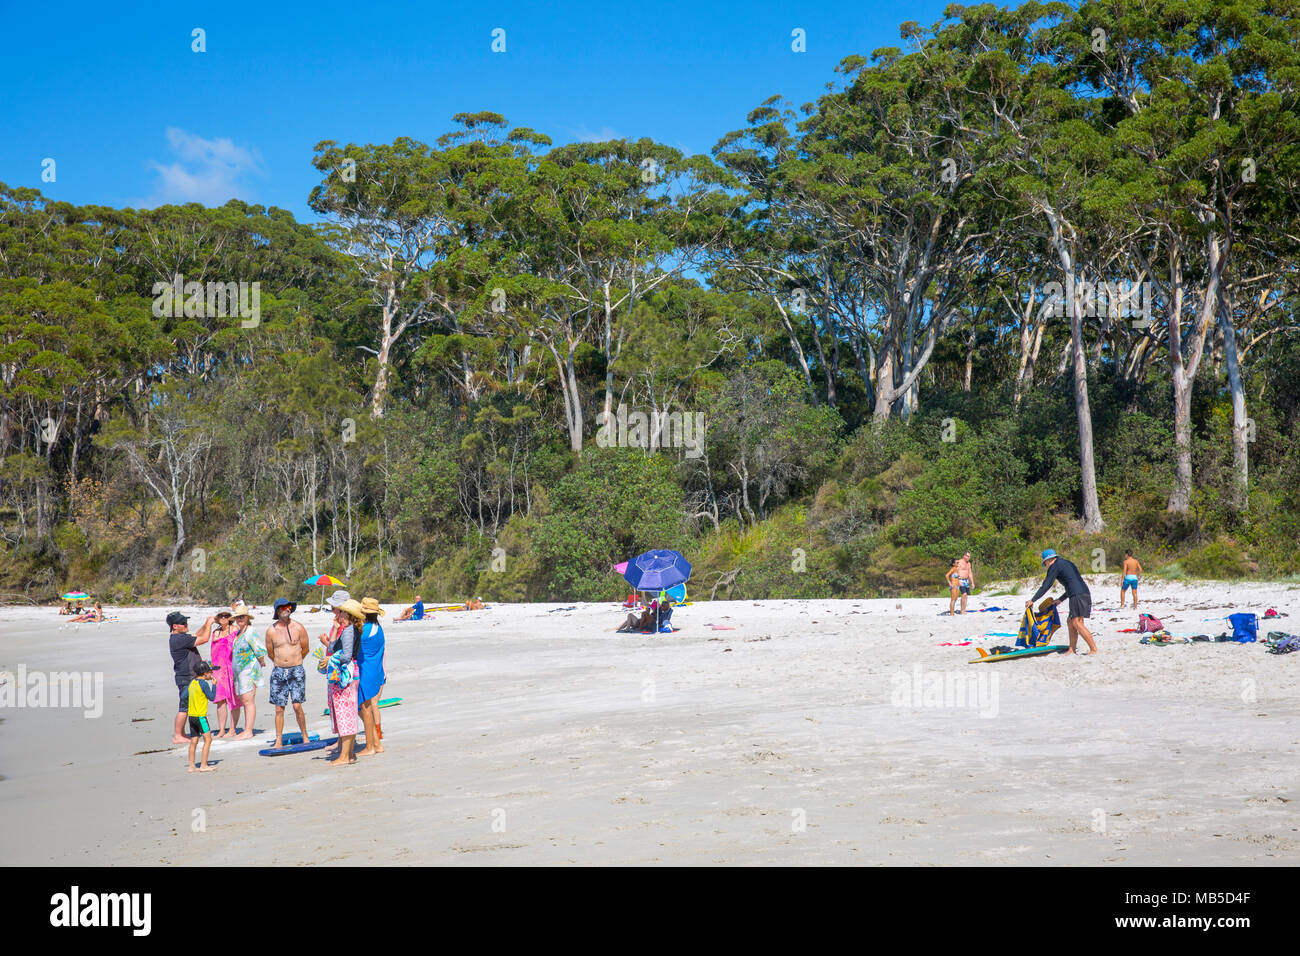 Herbst sonniger Tag am Strand in Blenheim Vincentia, Jervis Bay, New South Wales, Australien Stockfoto